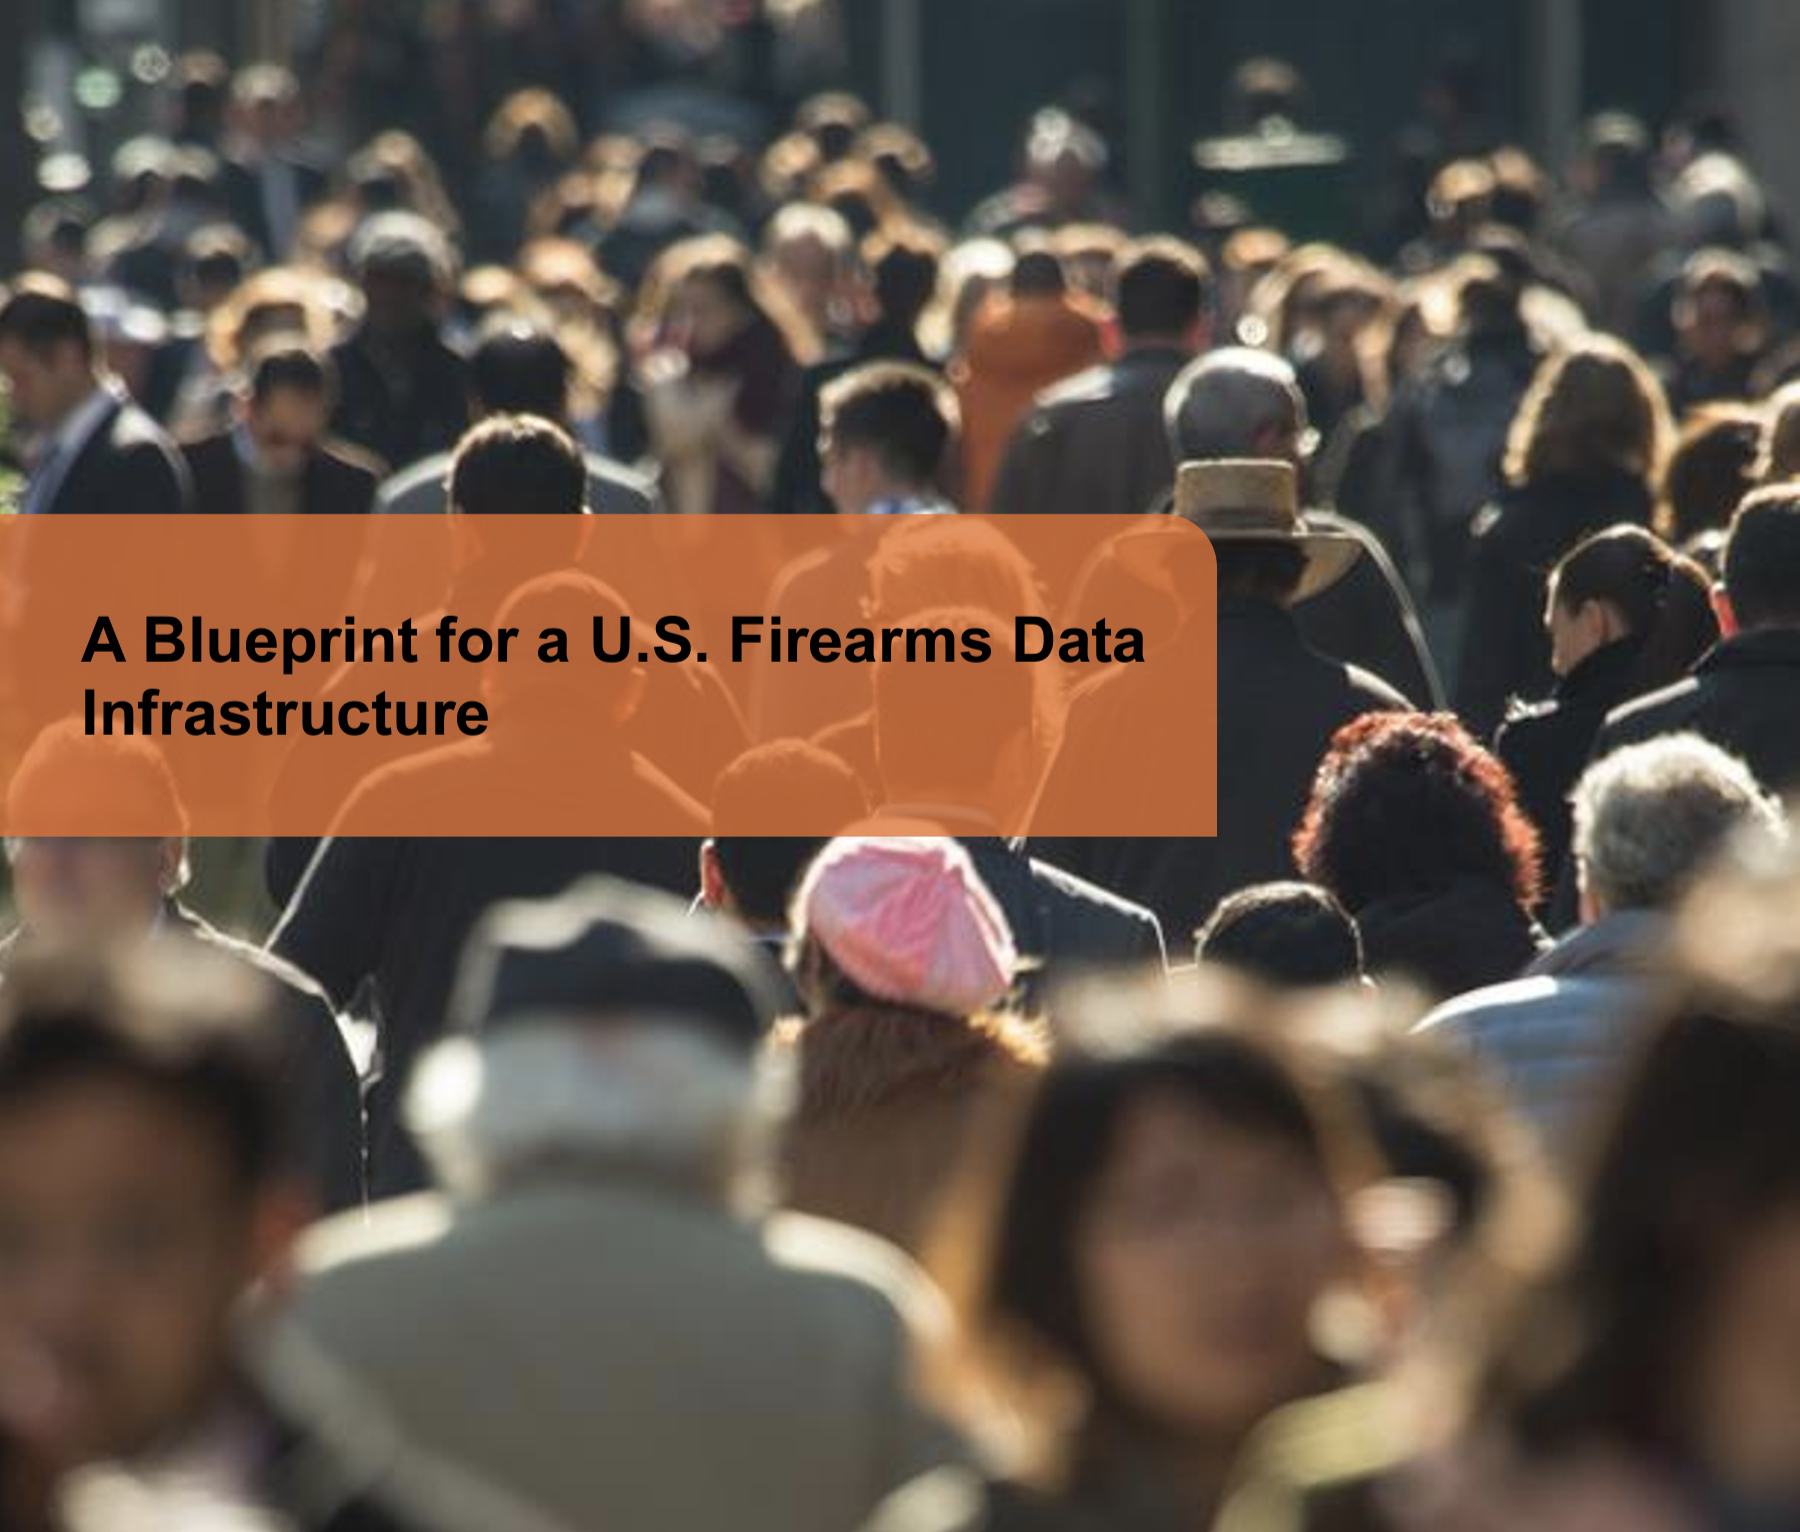 cover of report showing a crowd of people and text: A Blueprint for a U.S. Firearms Data Infrastructure